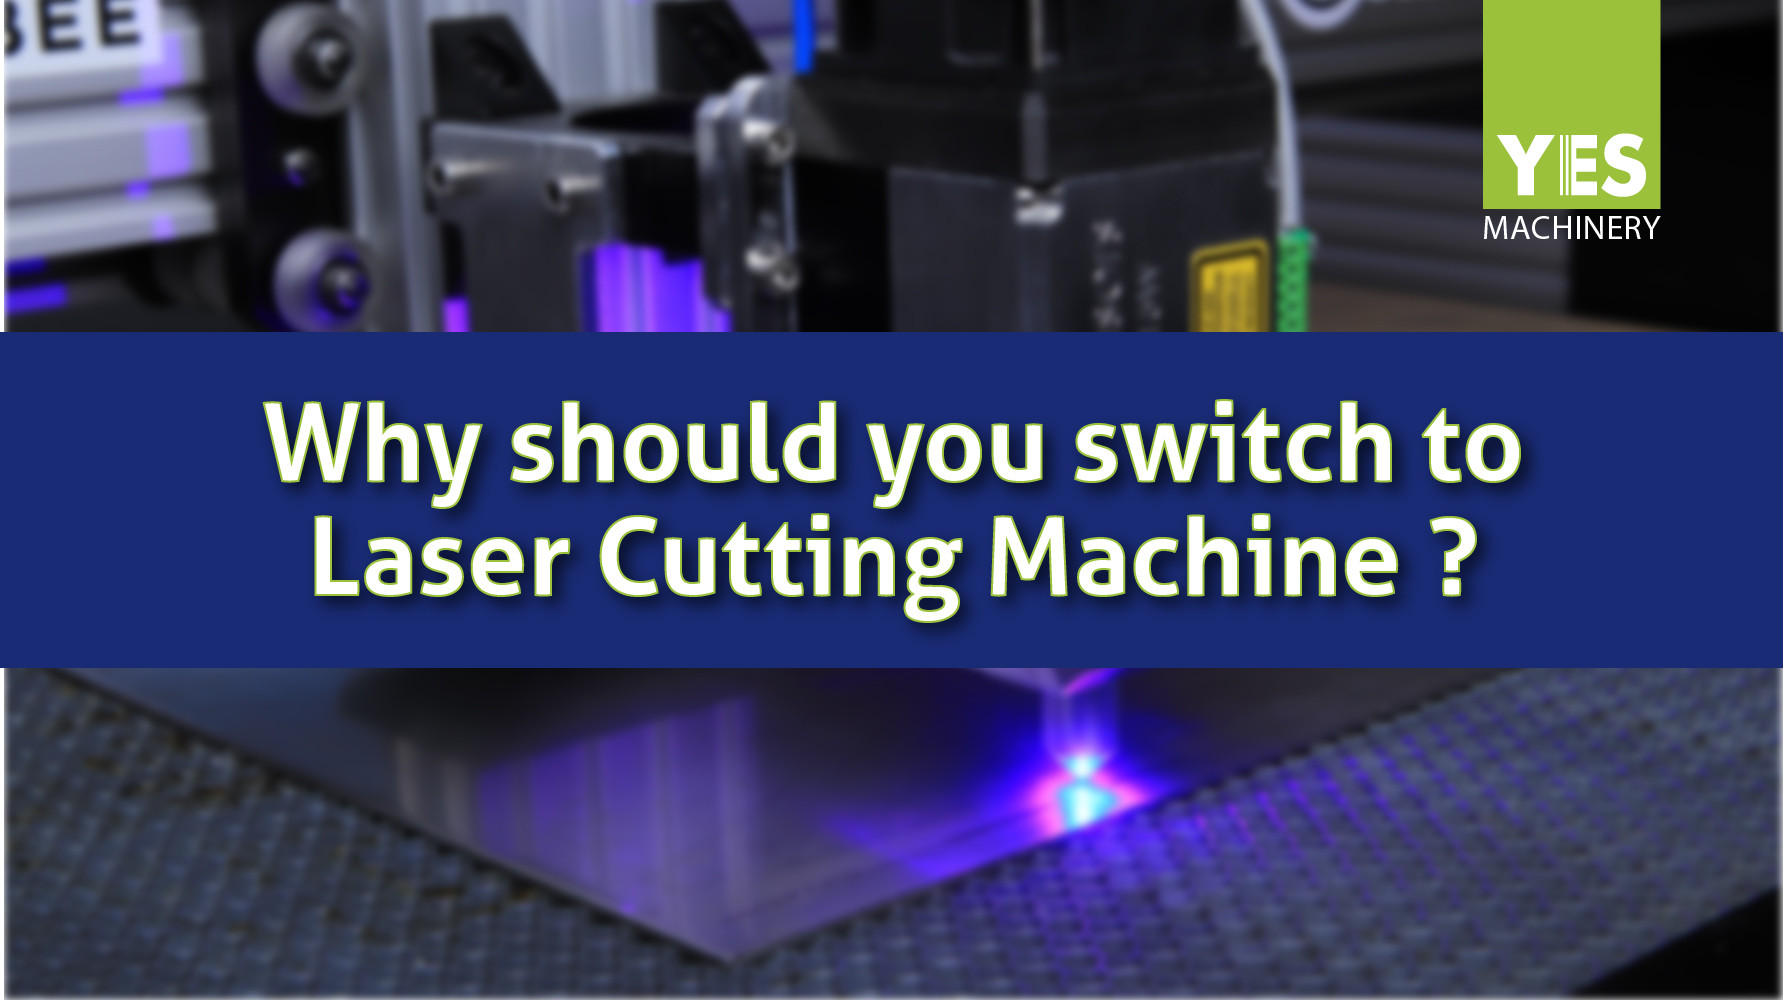 Why Should You Switch to a Laser Cutting Machine?